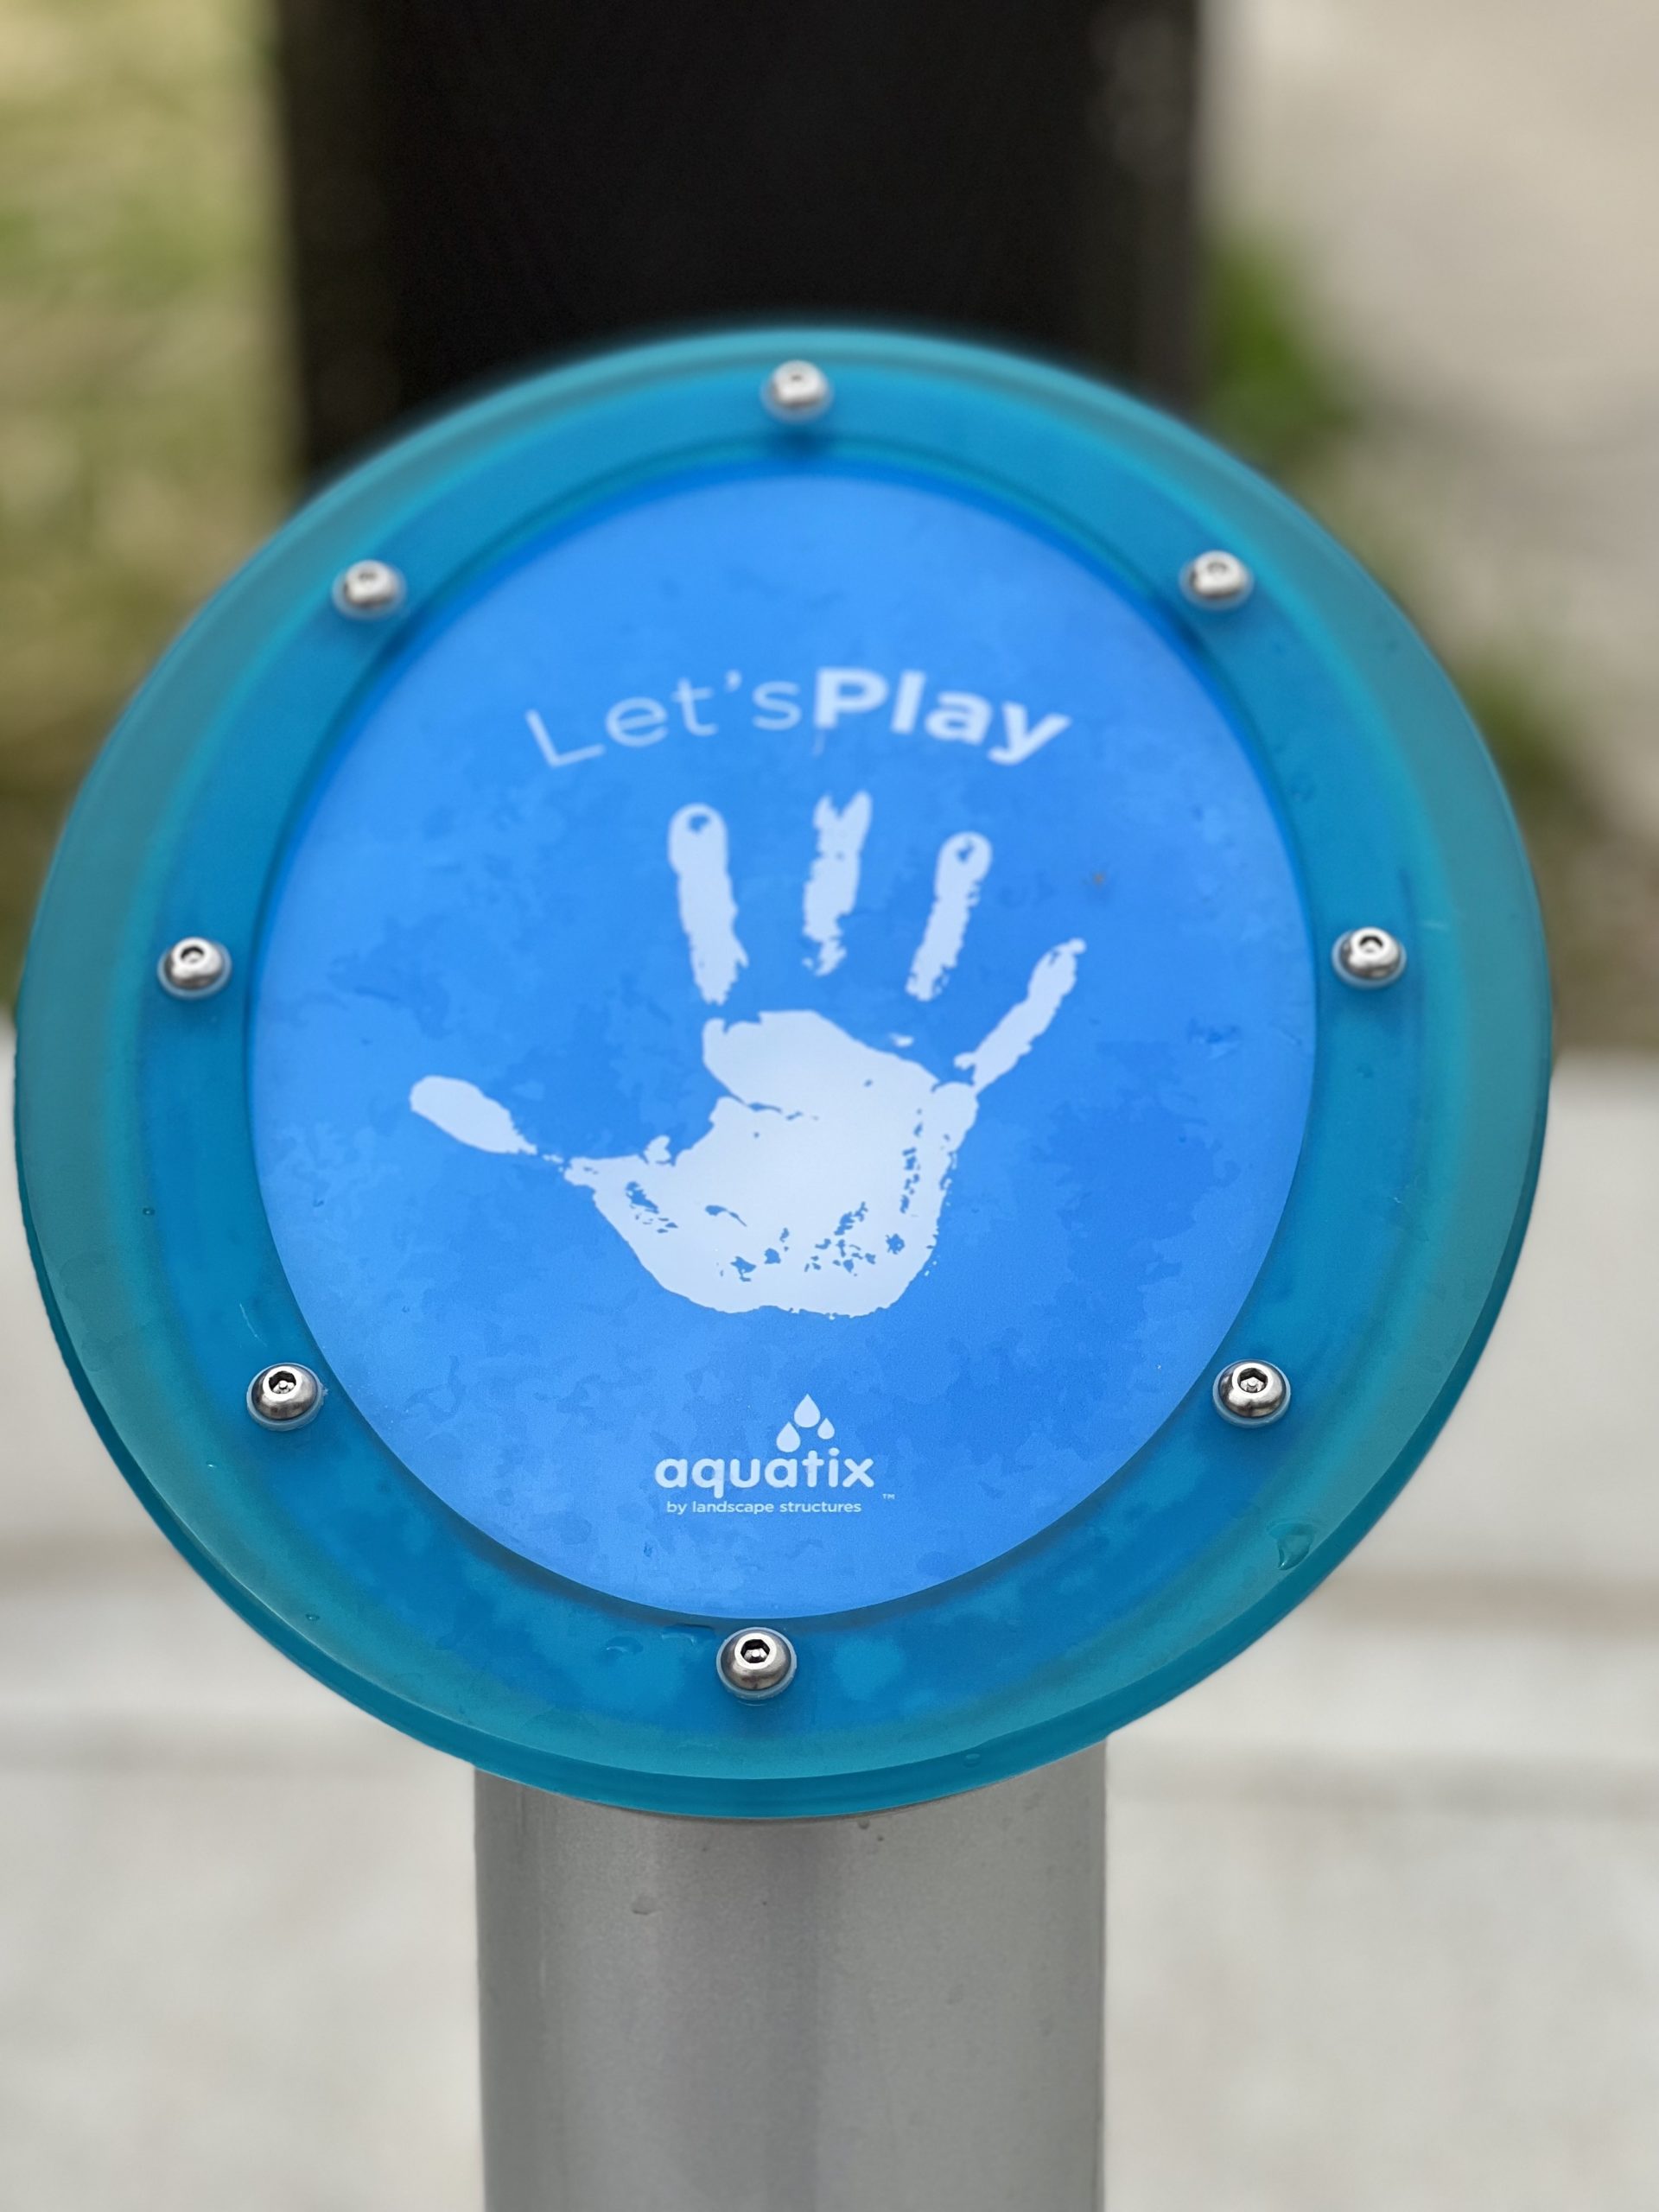 "Let's Play" hand print sensor launches the Inlow Splash Pad into full fun mode!